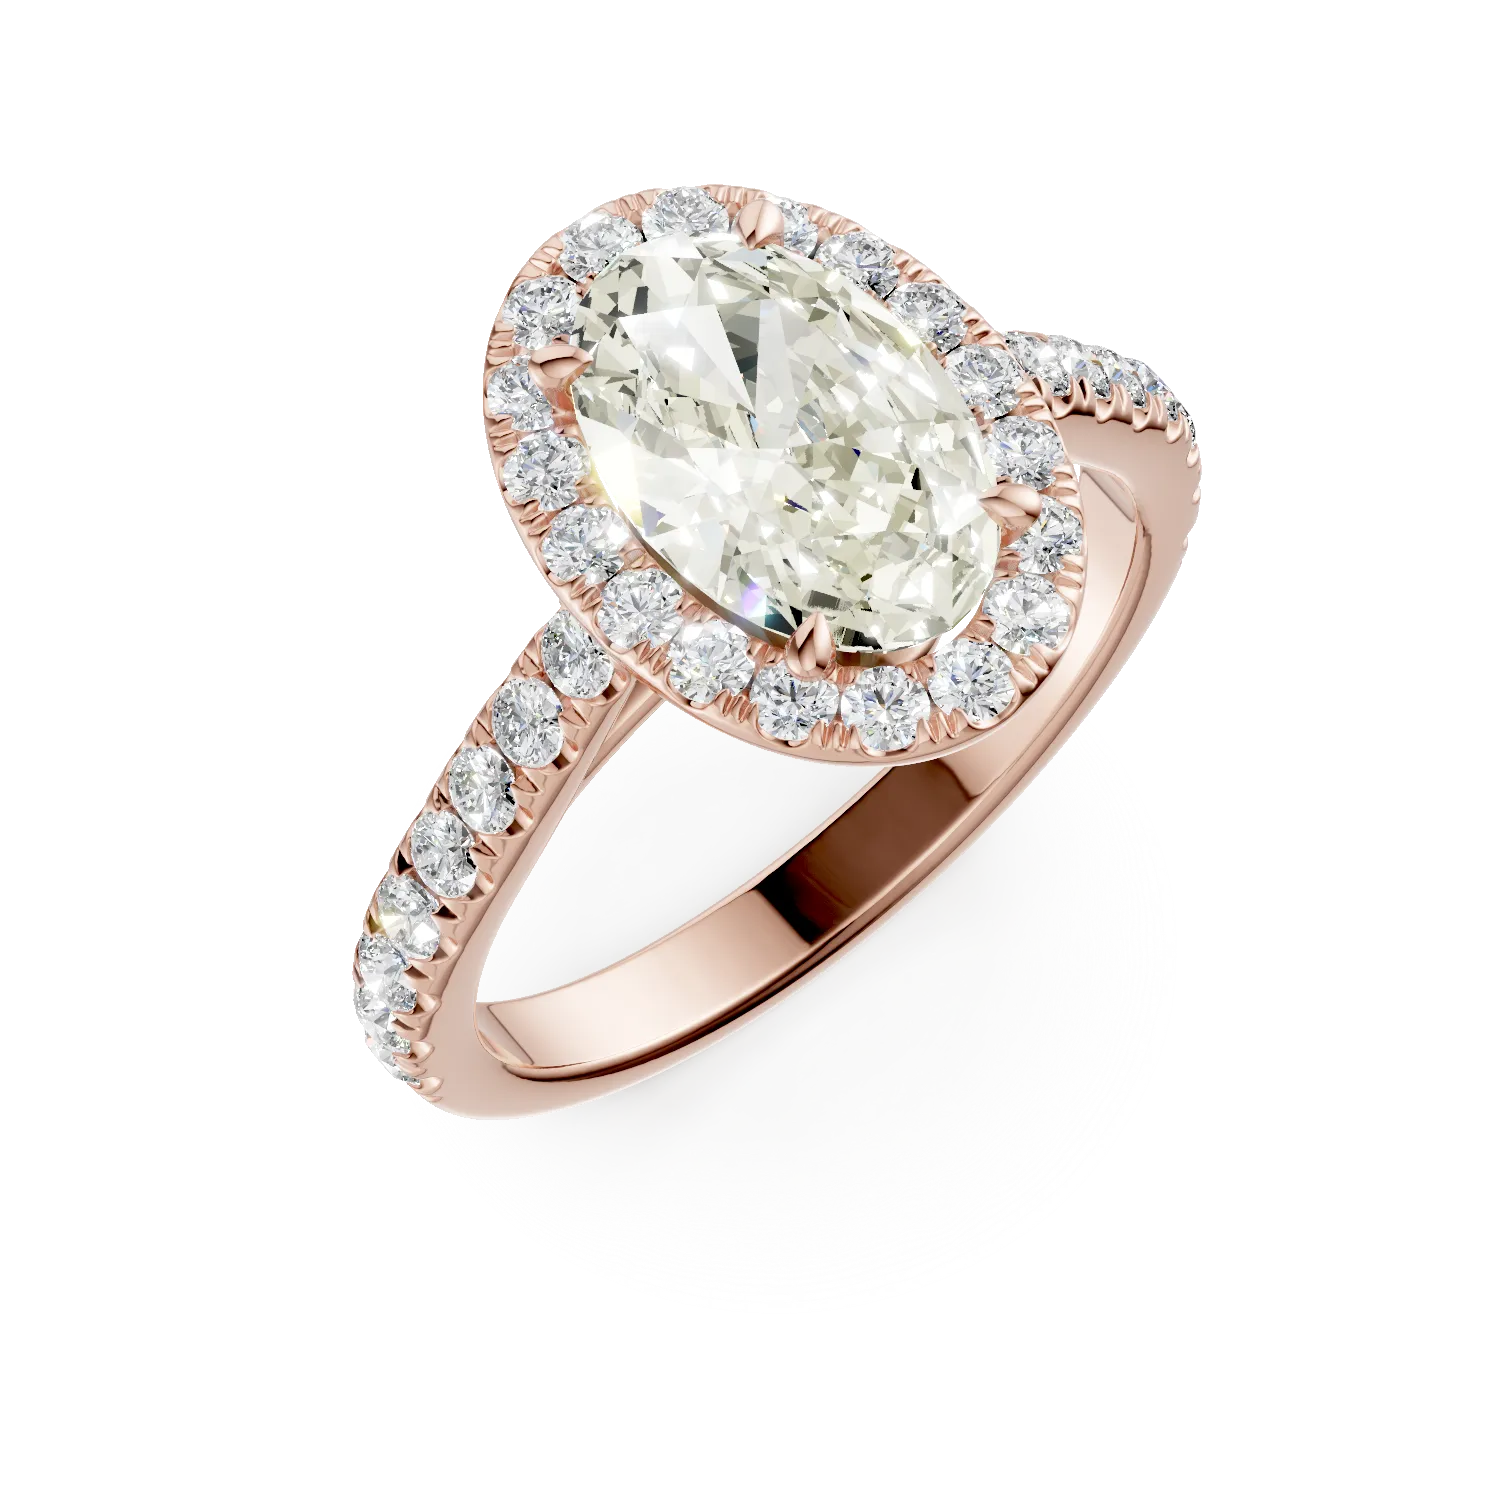 Rose gold engagement ring with 0.7ct diamond and 0.3ct diamonds